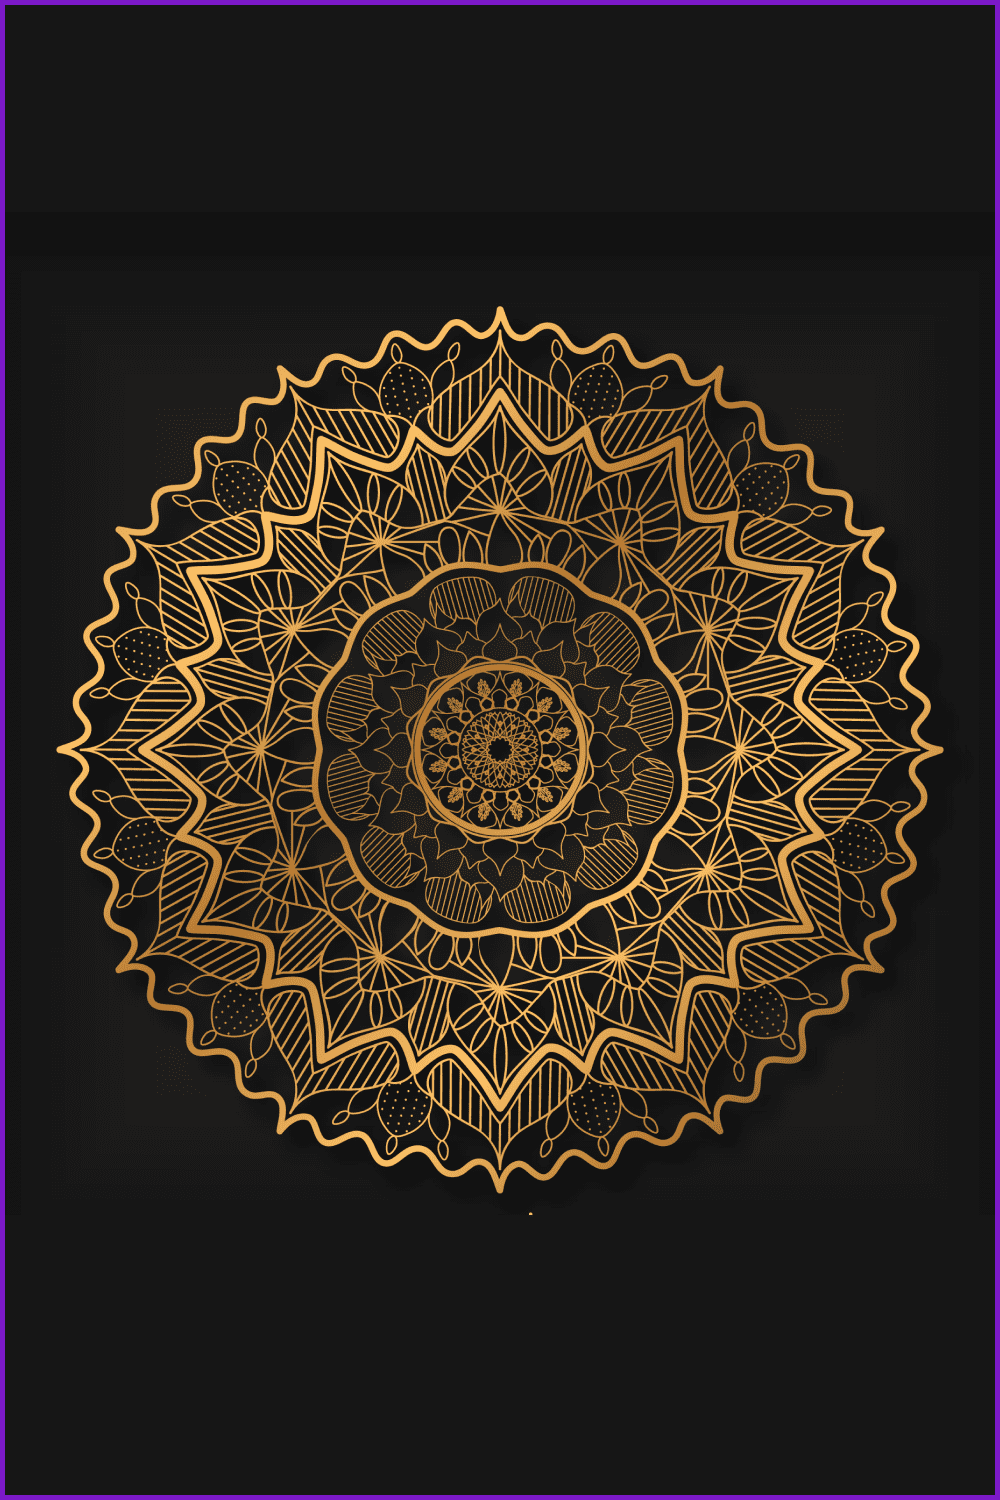 Luxury mandala from premium class. The golden lines looks very stylish on a black background.